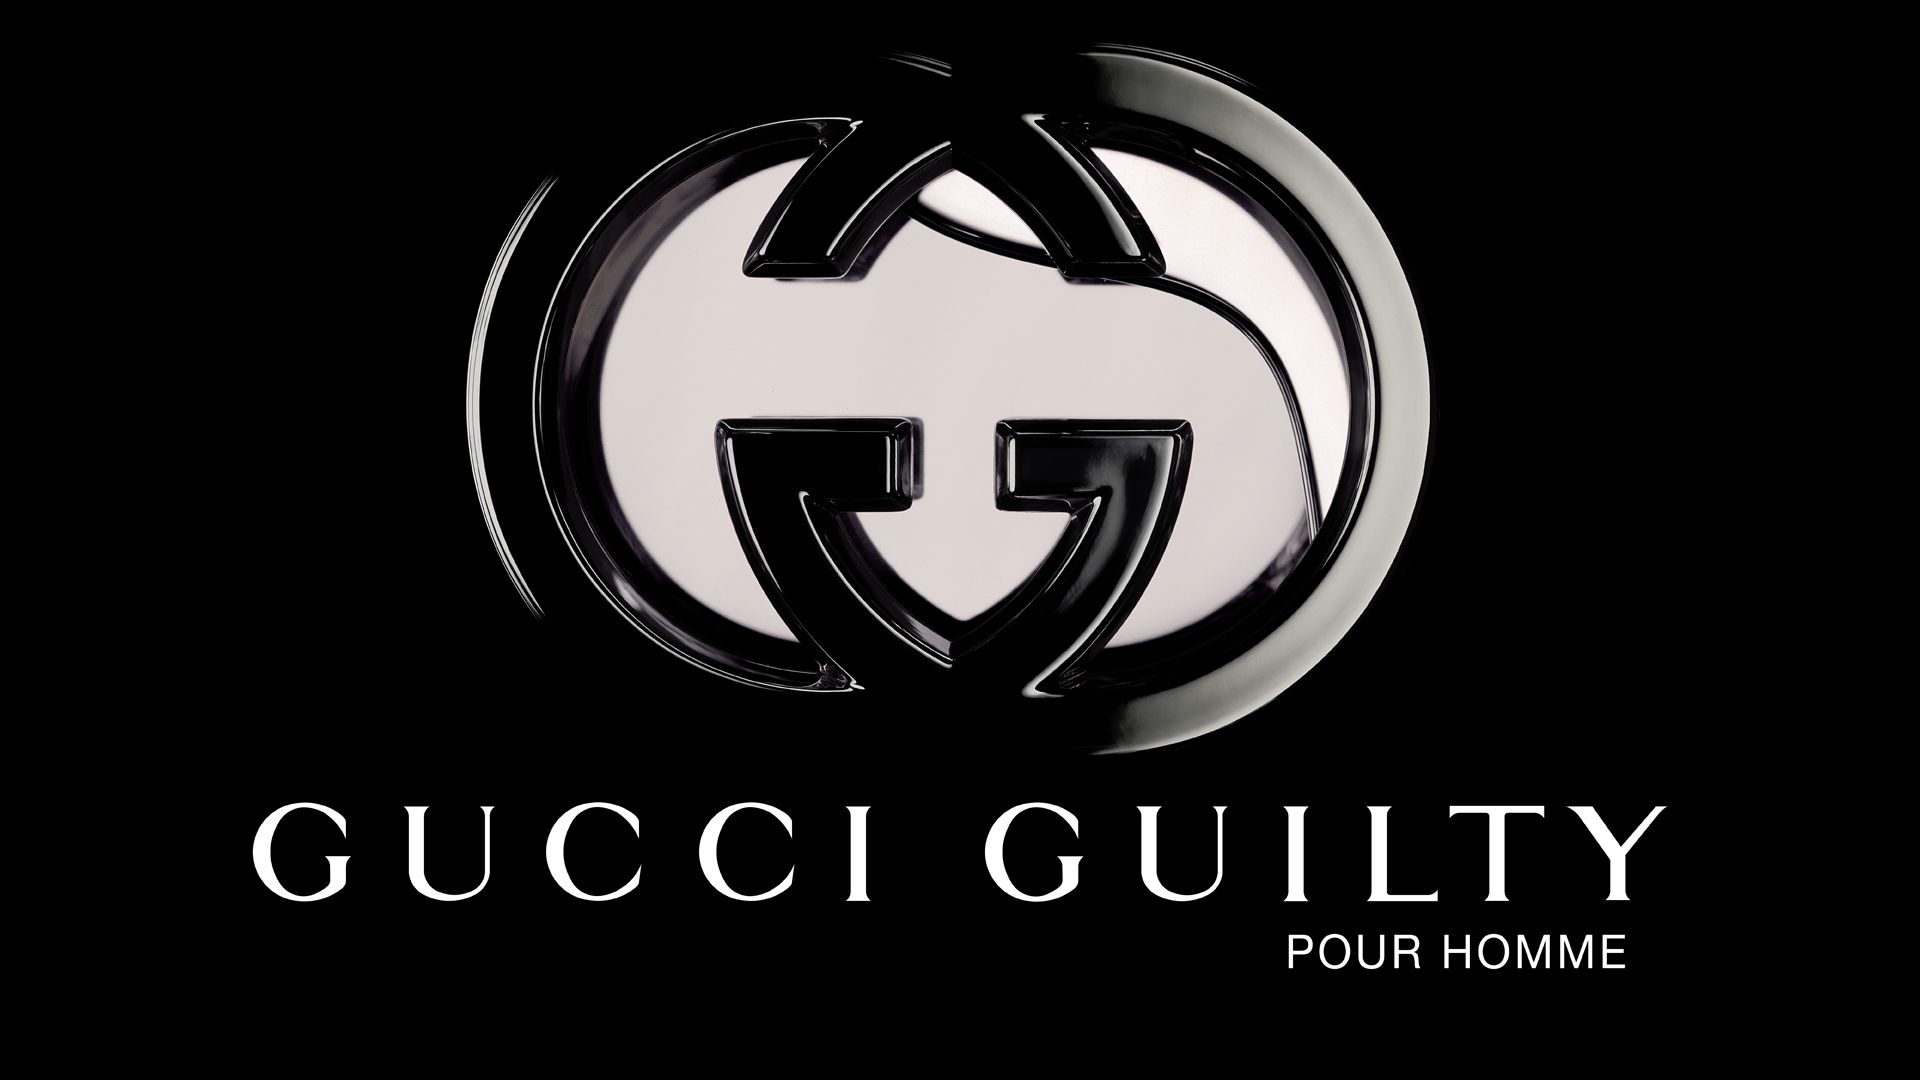 Free download 85 Gucci Logo Wallpapers on WallpaperPlay for